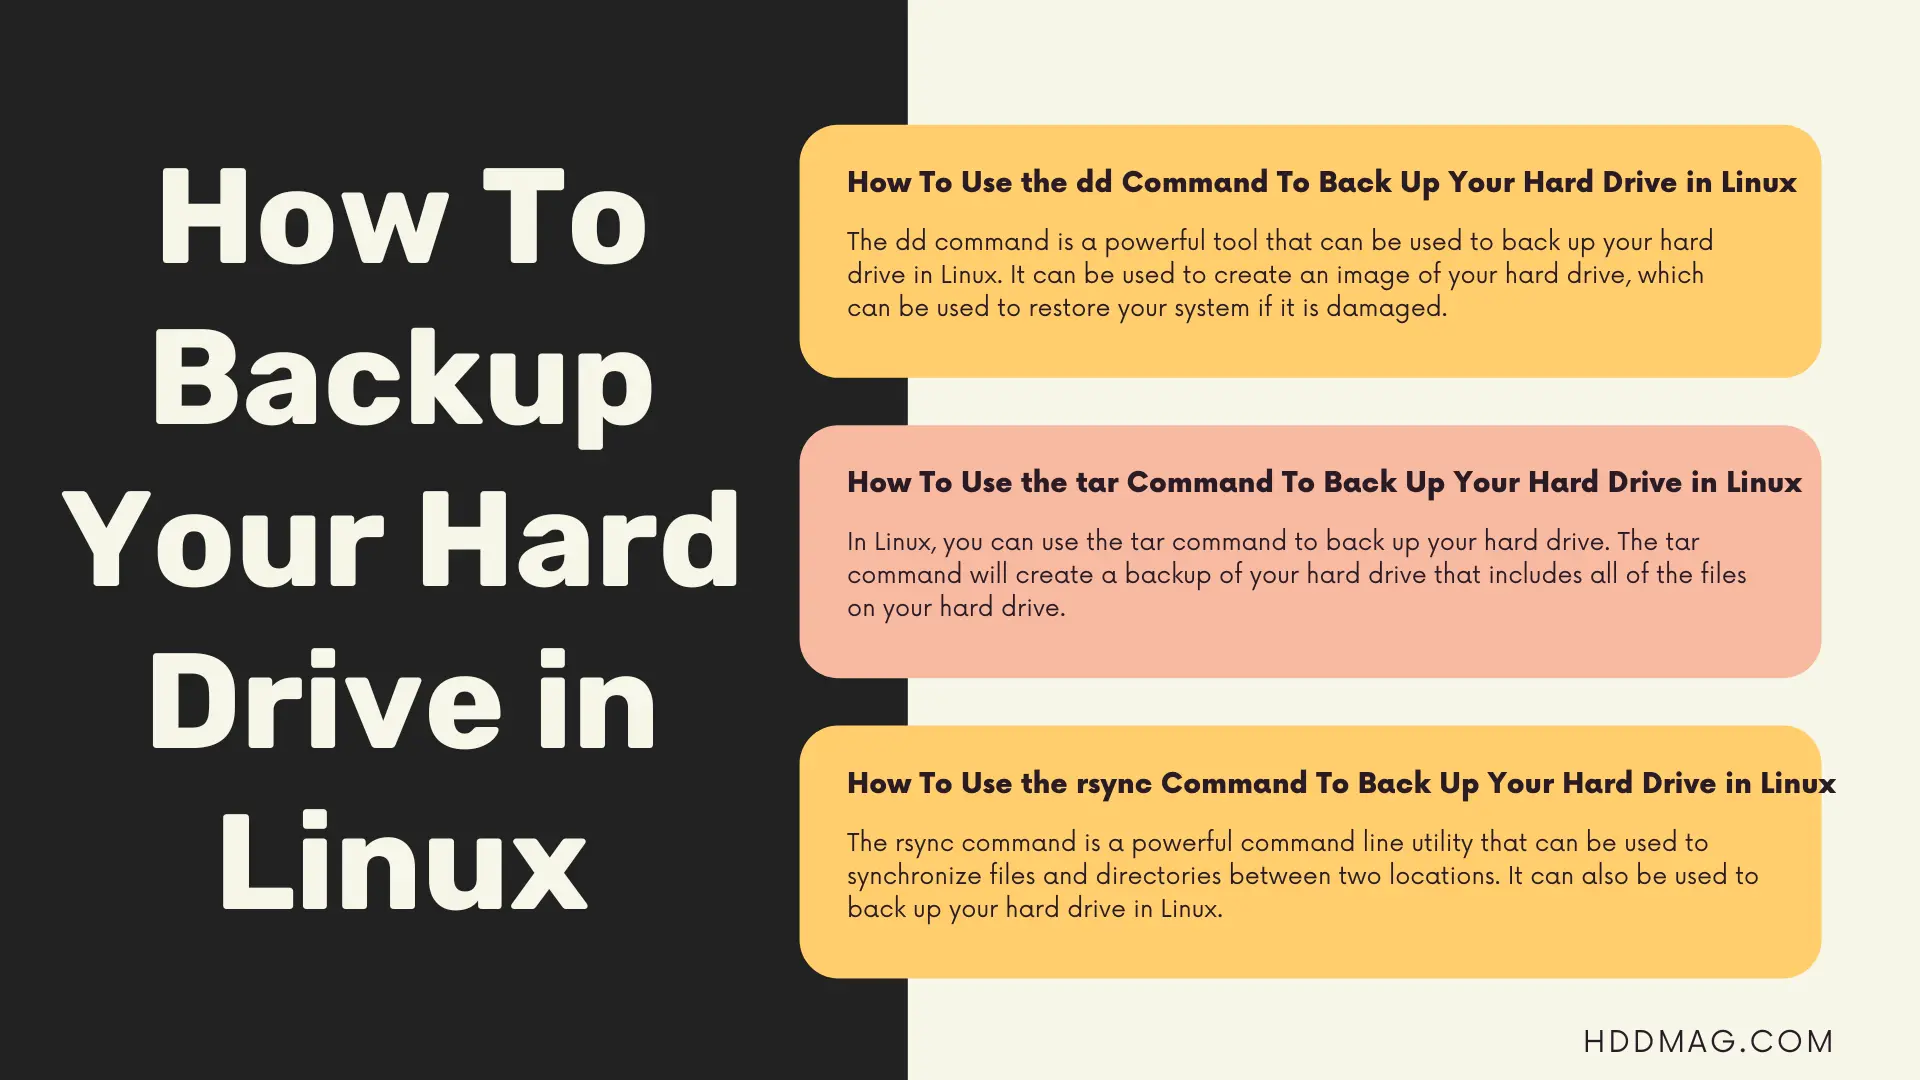 How To Backup Your Hard Drive in Linux